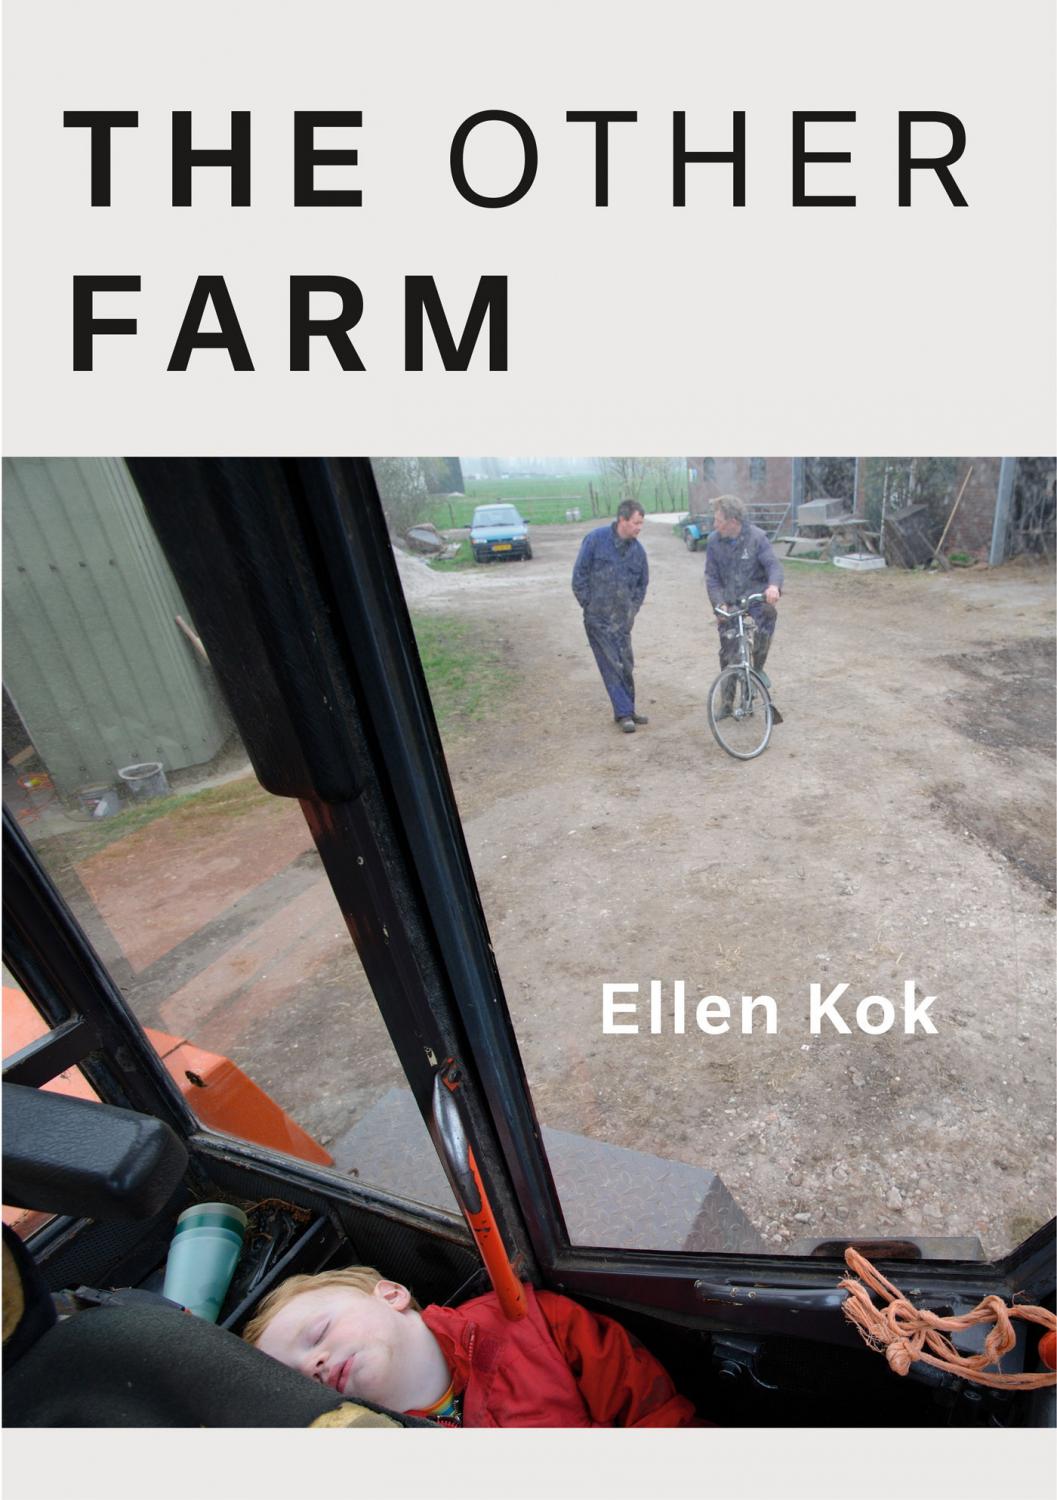  The Other Farm De Andere Boerderij Date of Publication: July 2015 Place of Publication: Linschoten, The Netherlands Graphic Design: Peter Jonker, Utrecht, The Netherlands Printer: Altijddrukwerk, Utrecht, The Netherlands Softcover, dimensions 210 x 297 mm Binding:&nbsp;Perfectbound Number of Pages: 64 pages Number of Photographs: 56 in black &amp; white and color With a written story of over 20,000 words Published in an English (500) and a Dutch (500) edition ISBN 978-90-81939-61-4 Publisher: Netherlight / Self-Published